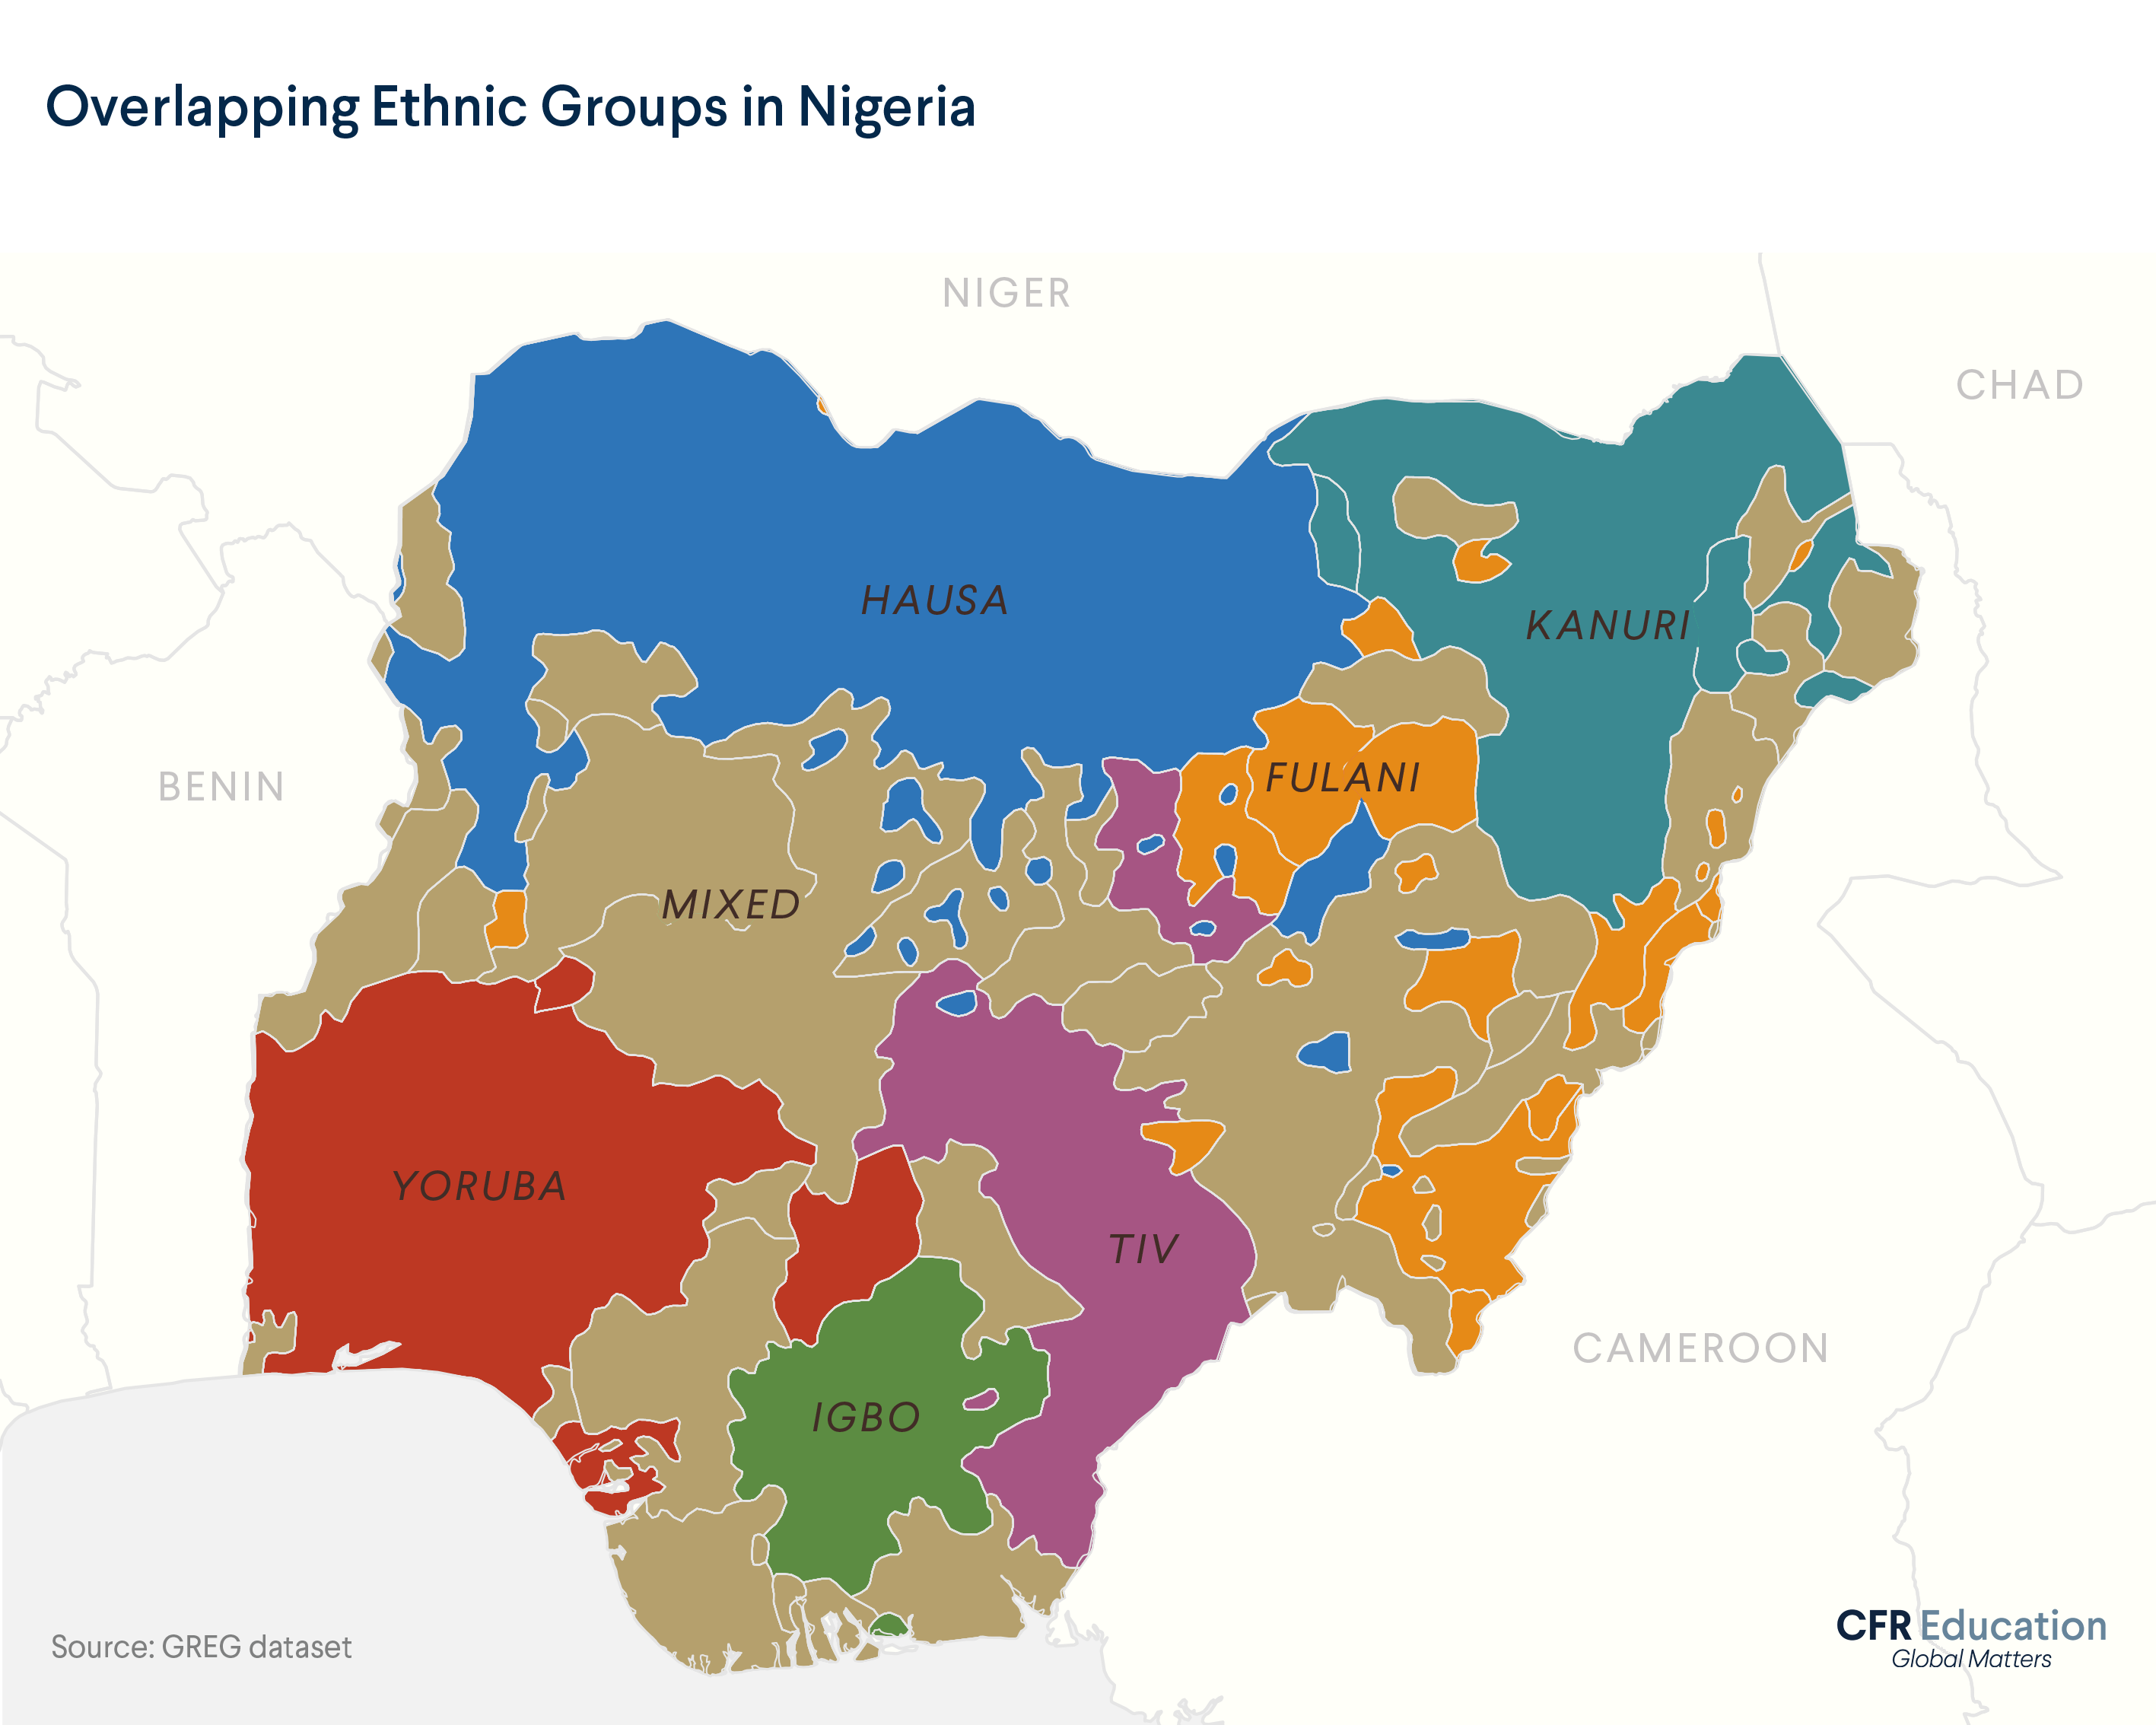 Map shows how different ethnic groups overlap over many parts of Nigeria. Source: GREG dataset. For more info contact us at cfr_education@cfr.org.